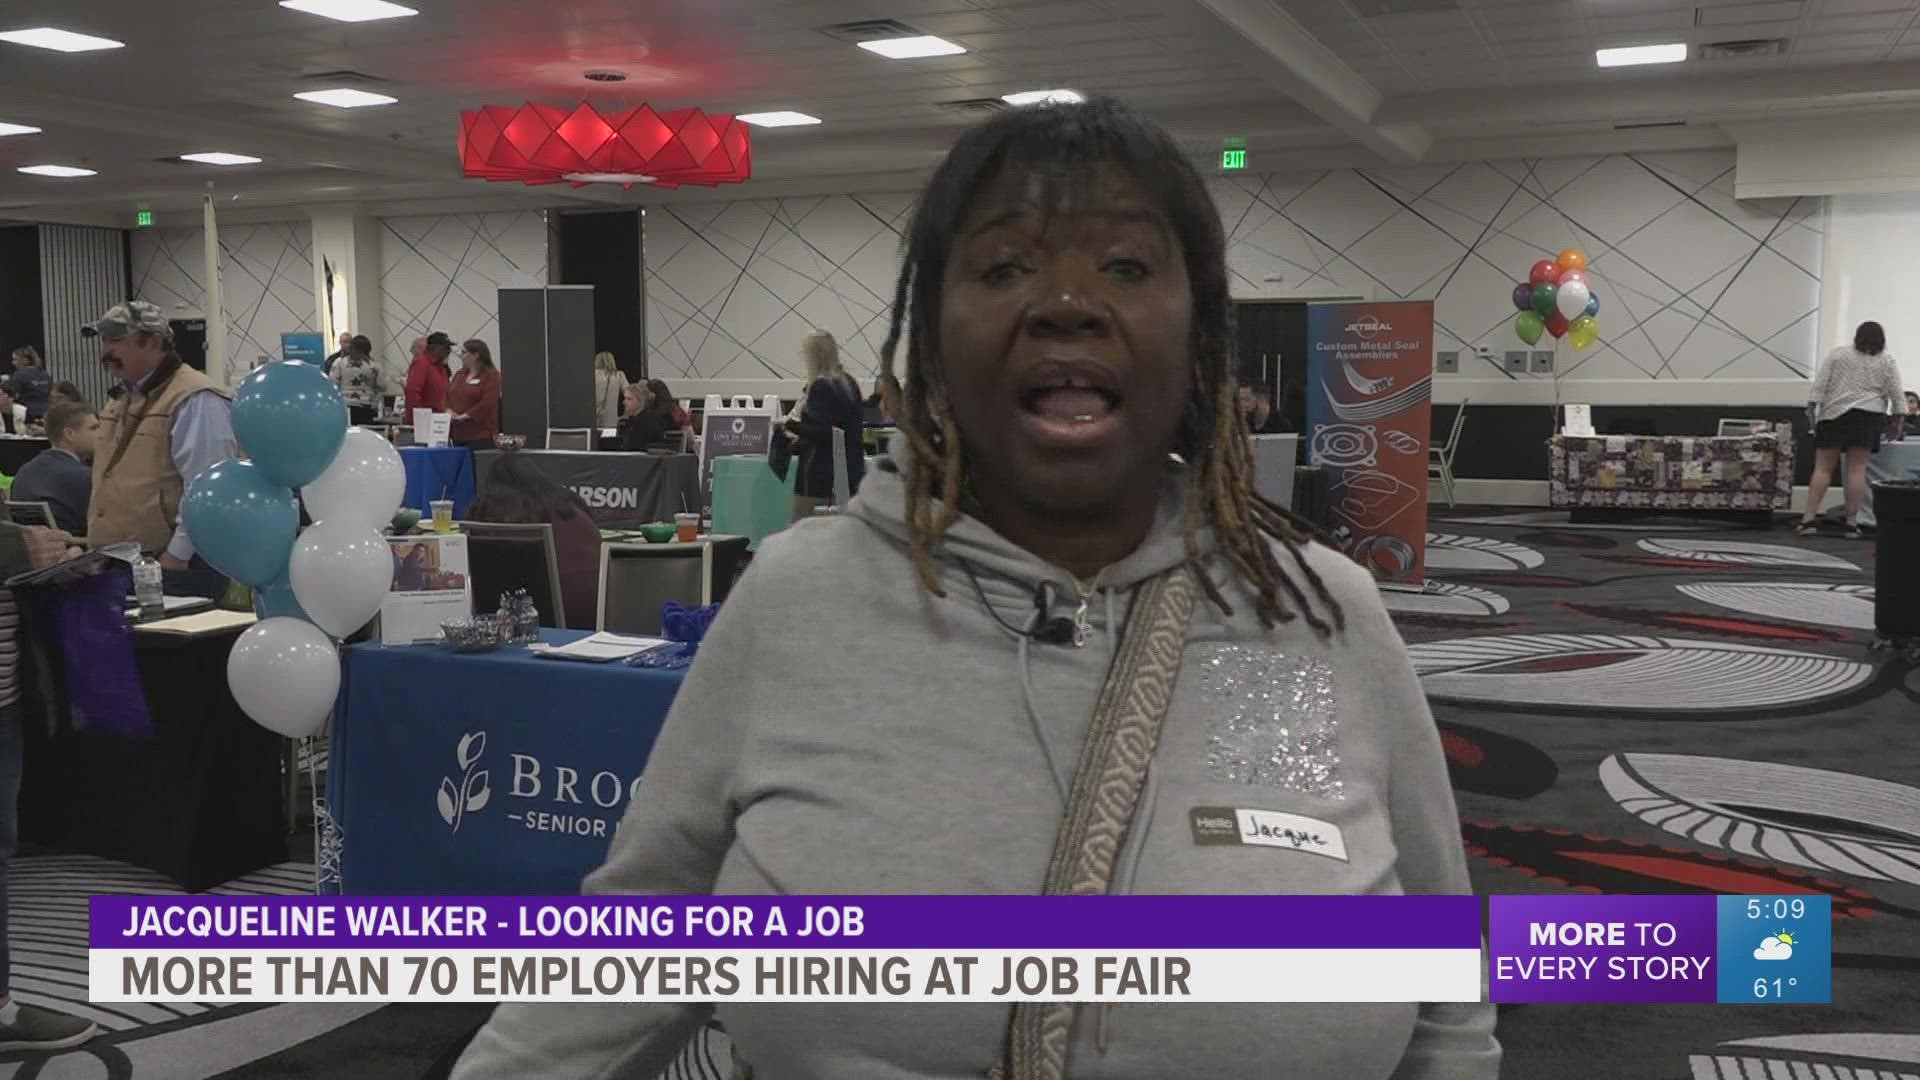 The annual job fair is a chance for employers and potential employees to connect.